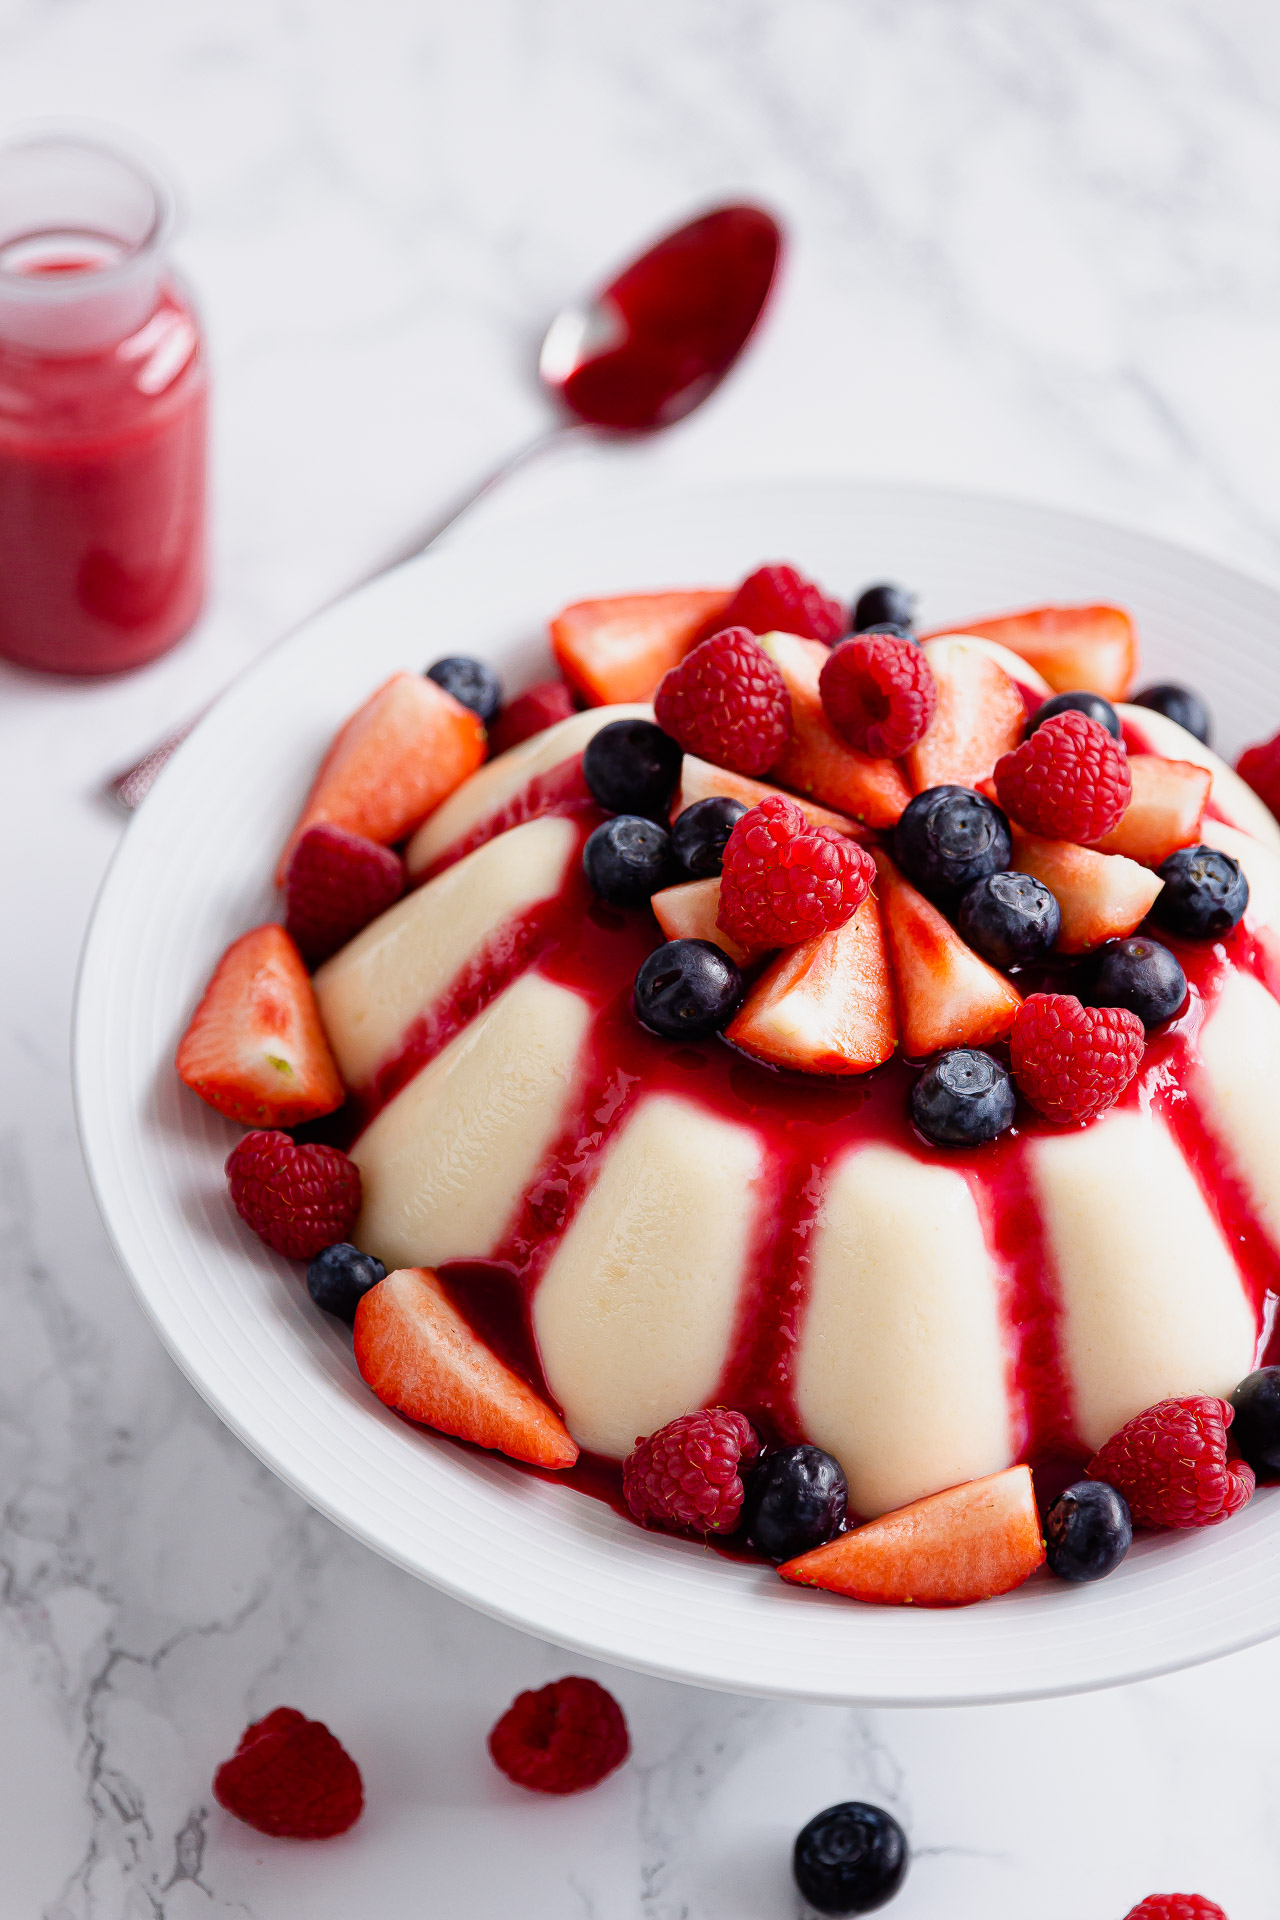 SEMOLINA PUDDING WITH A SOFT, CREAMY TEXTURE AND REFRESHING RASPBERRY SAUCE 